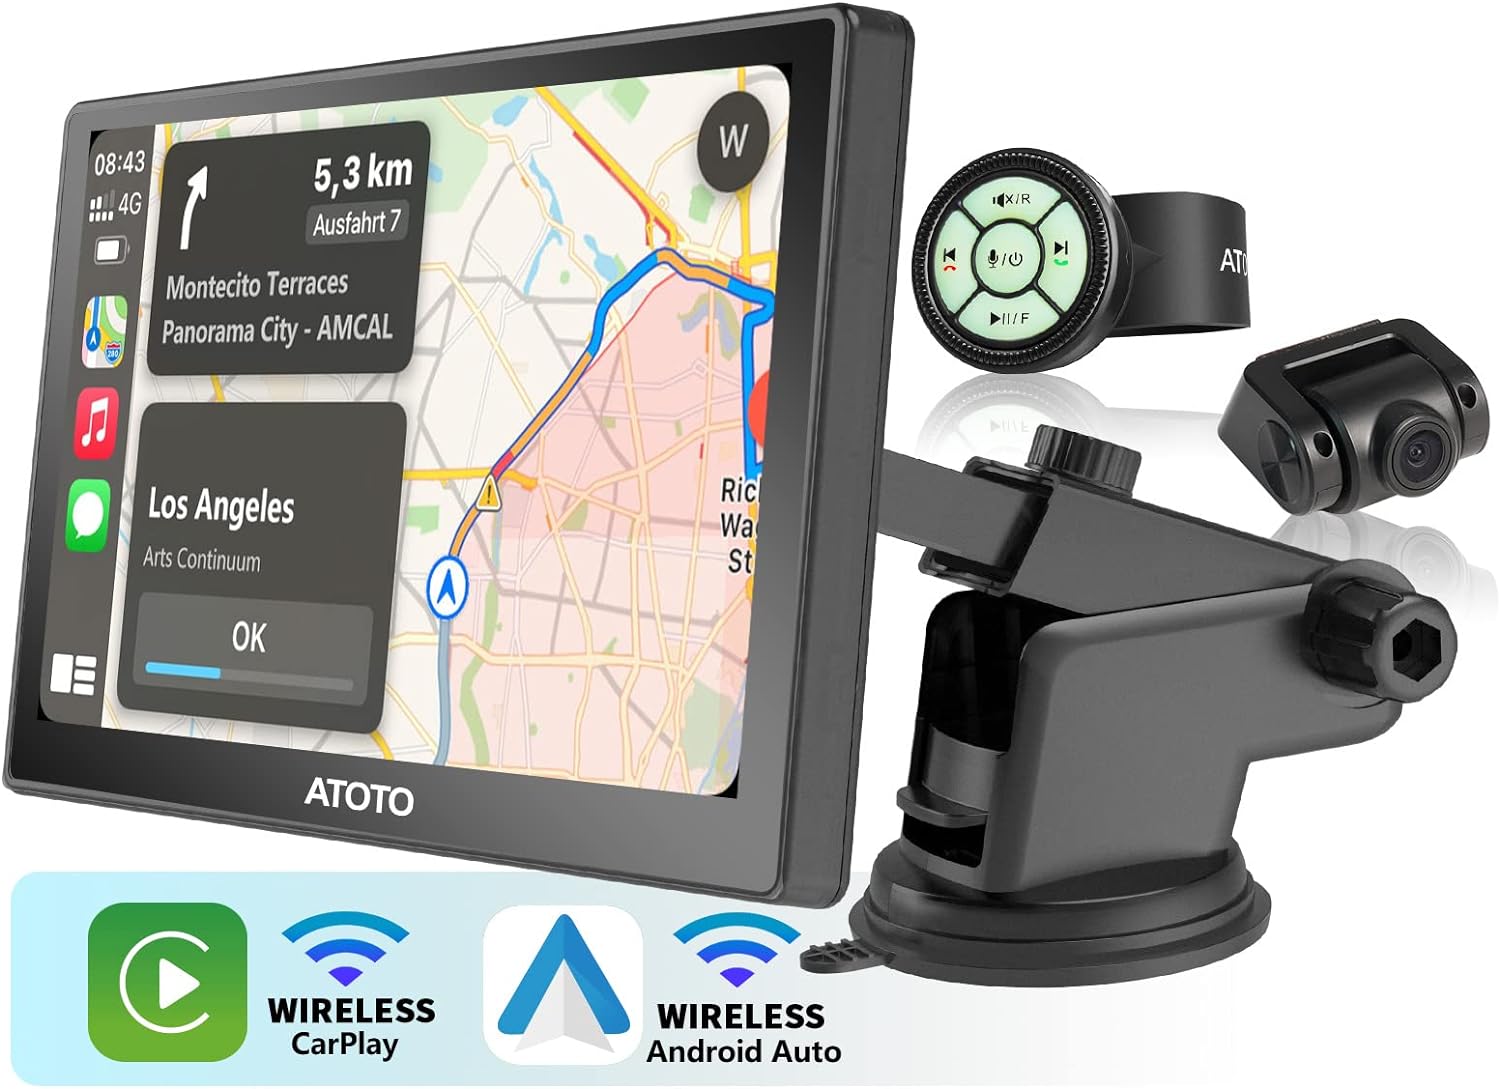 ATOTO P8 7-inch Touchscreen Portable On-Dash Navigation, Wireless Carplay & Wireless Android Auto, with HD 1080P Front Dash Cam, WDR & Auto Dimmer, Remote Control